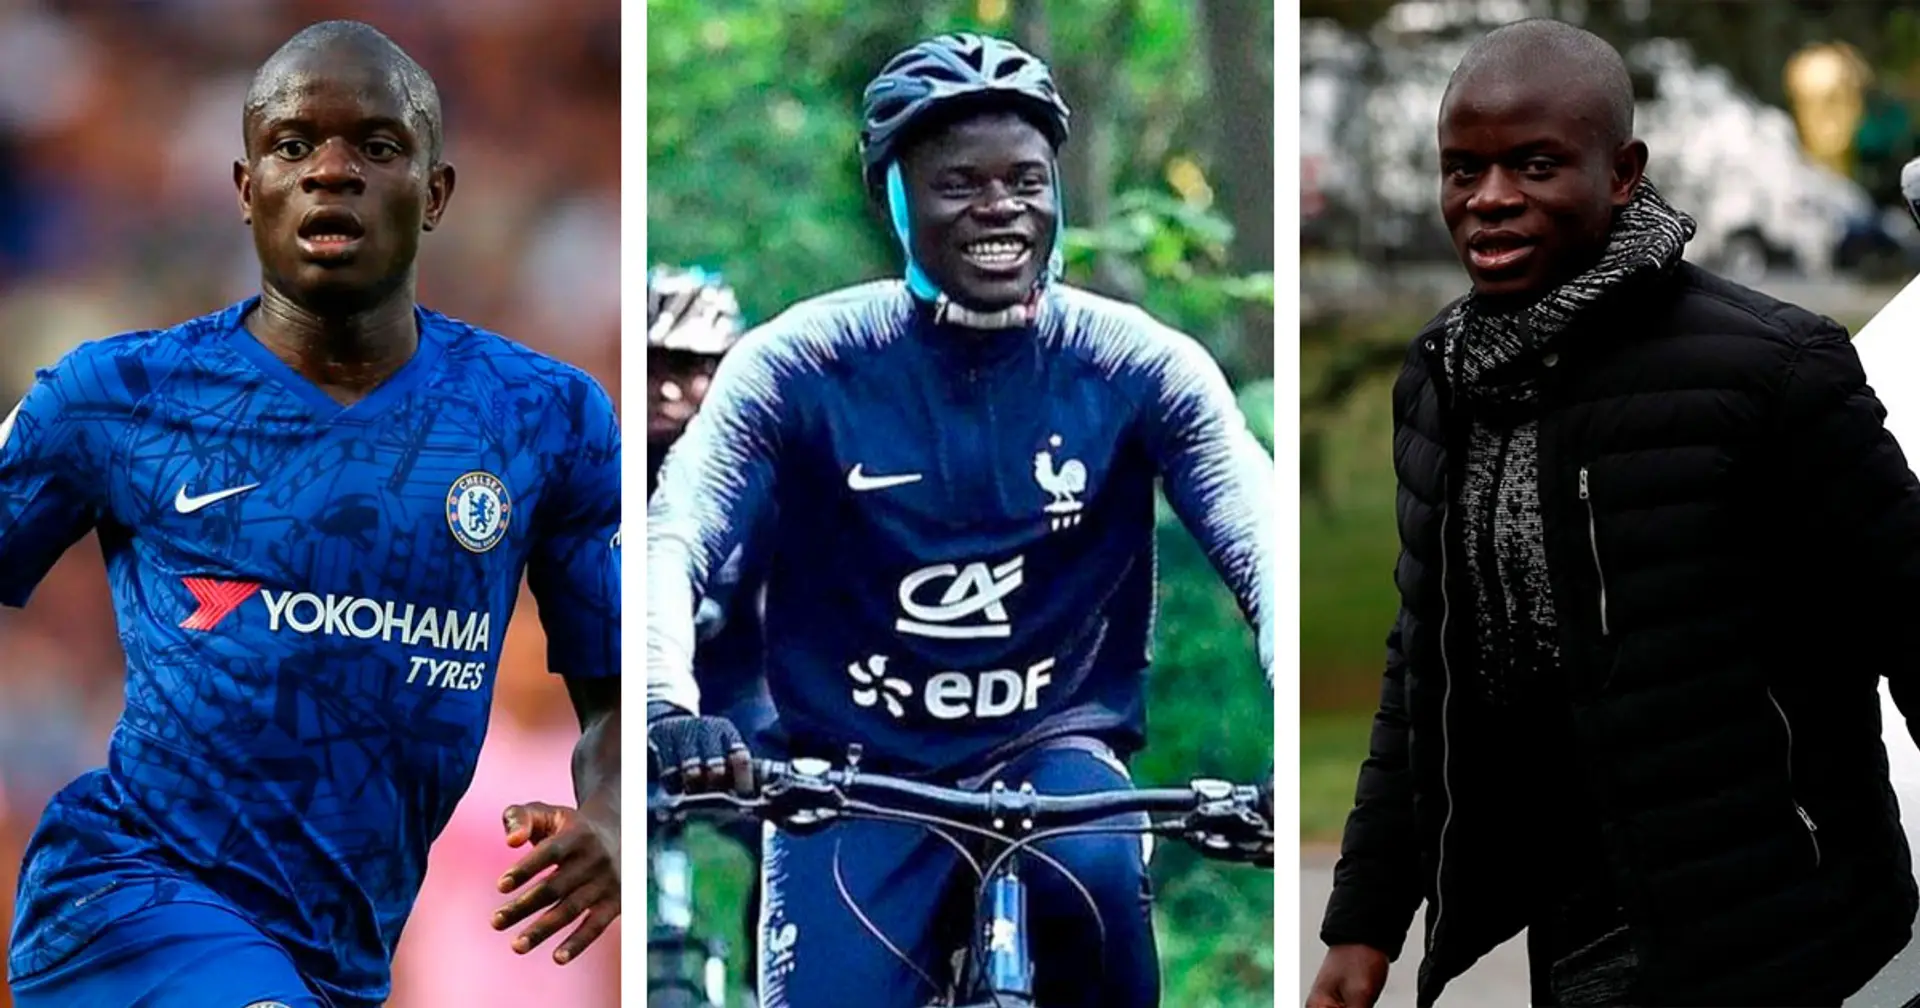 Let's play a game! Two truths and a lie: N'Golo Kante